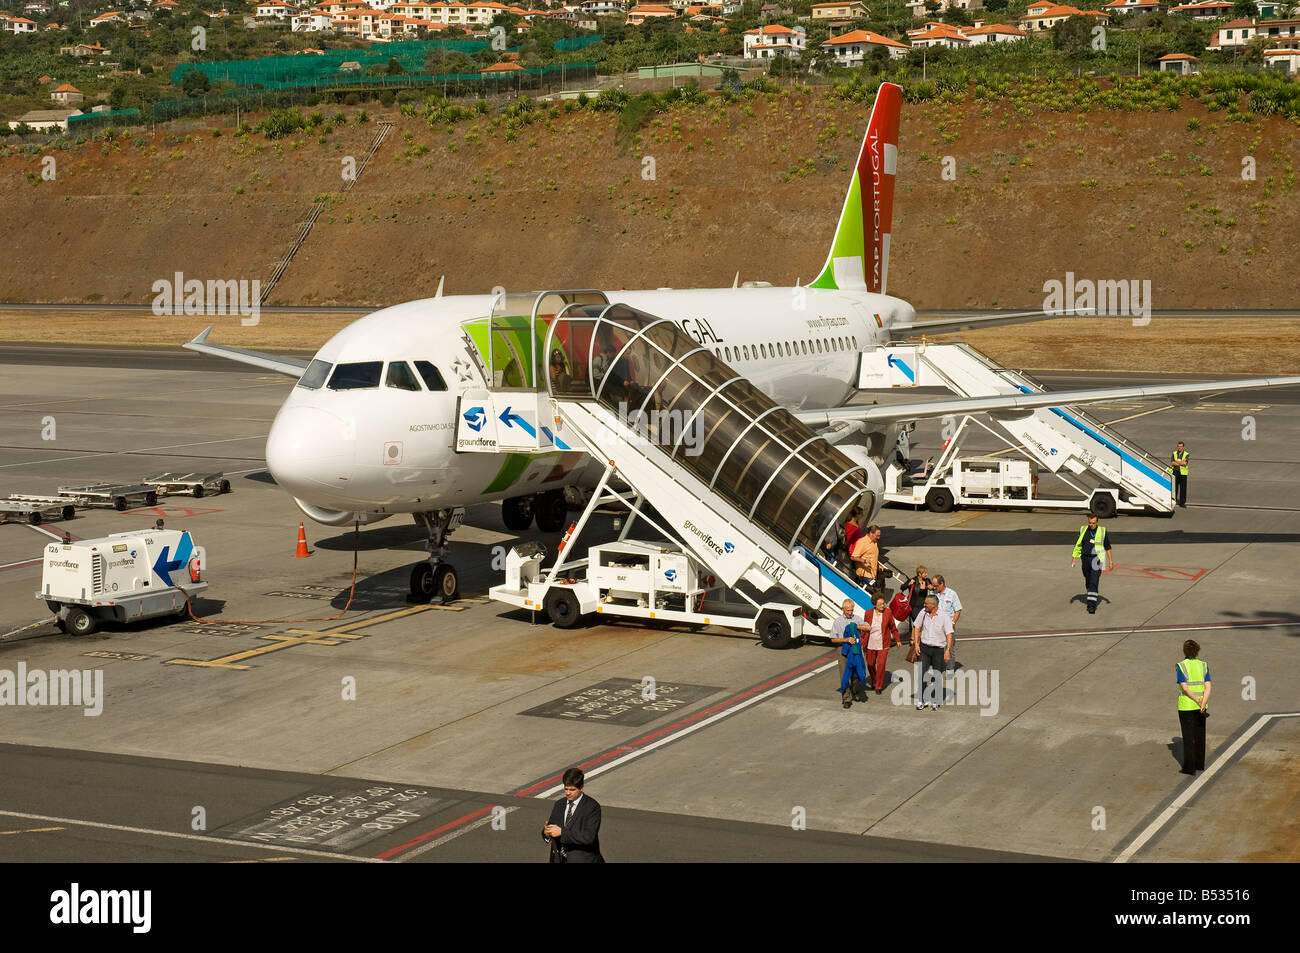 TAP Air Portugal plane aircraft at Funchal airport Madeira Portugal EU Europe Stock Photo